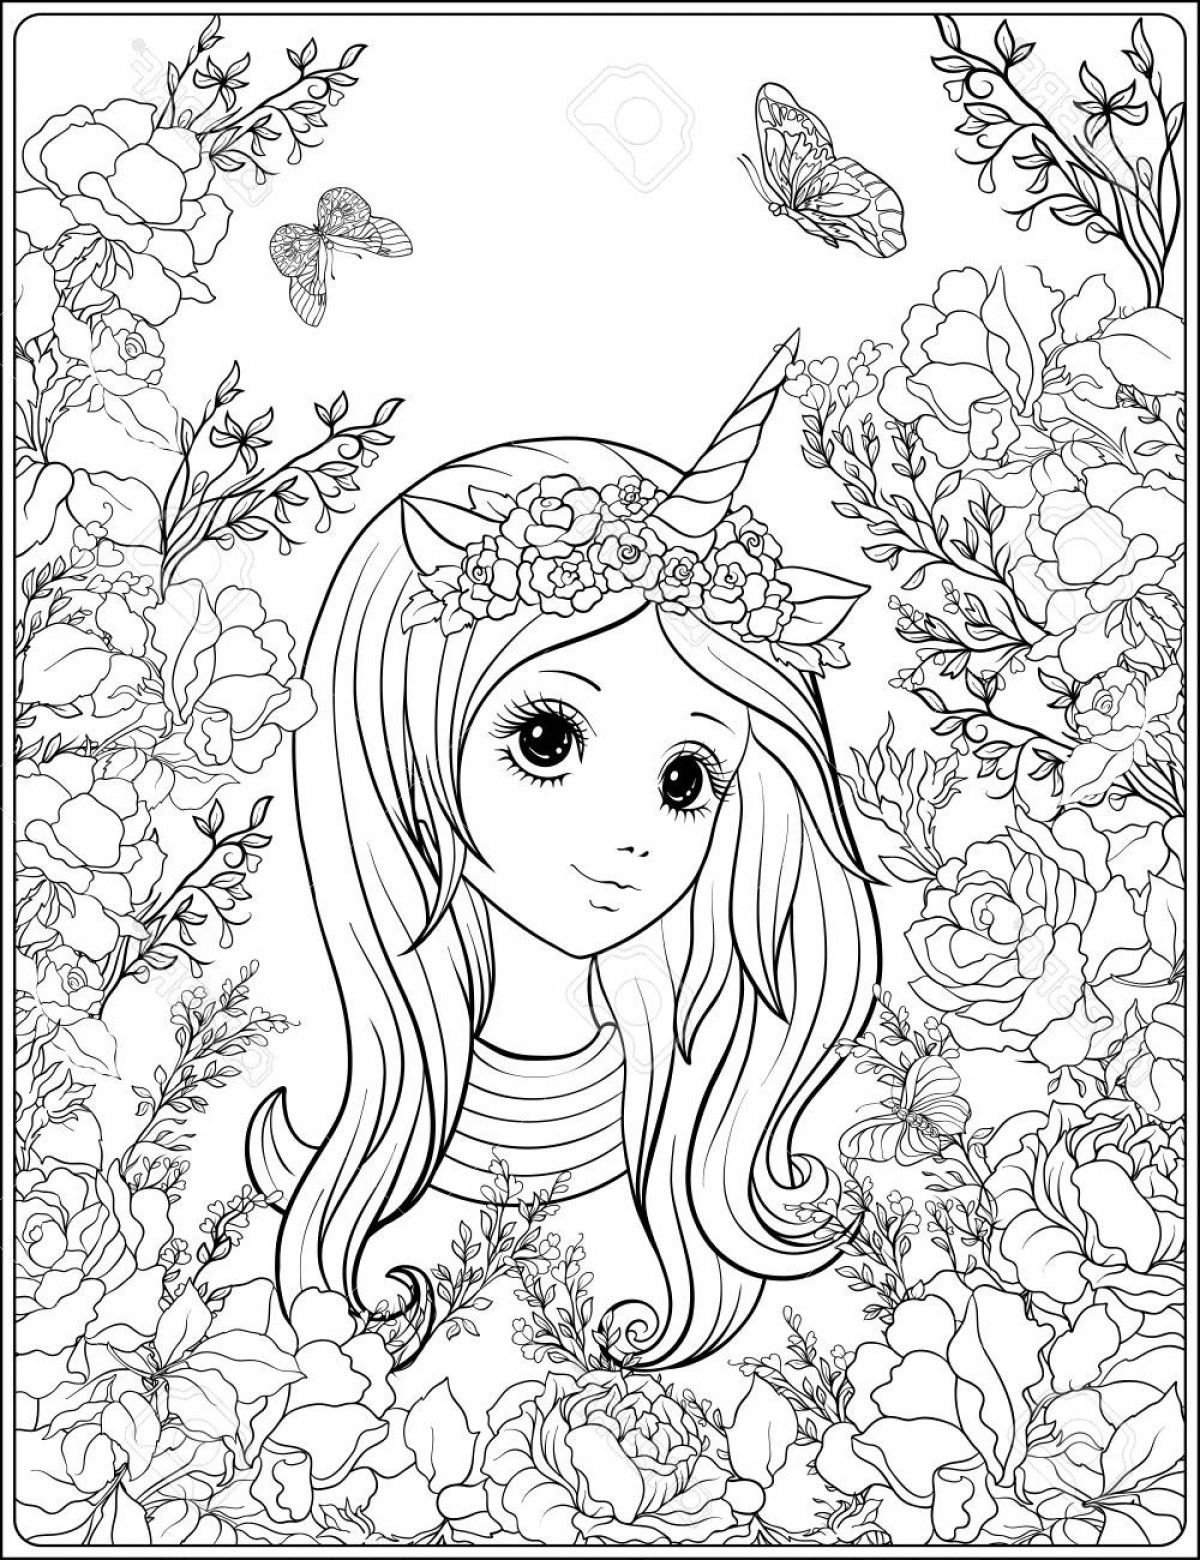 Unicorn Girl Coloring Pages
 Unicorn Horn Outline Vector